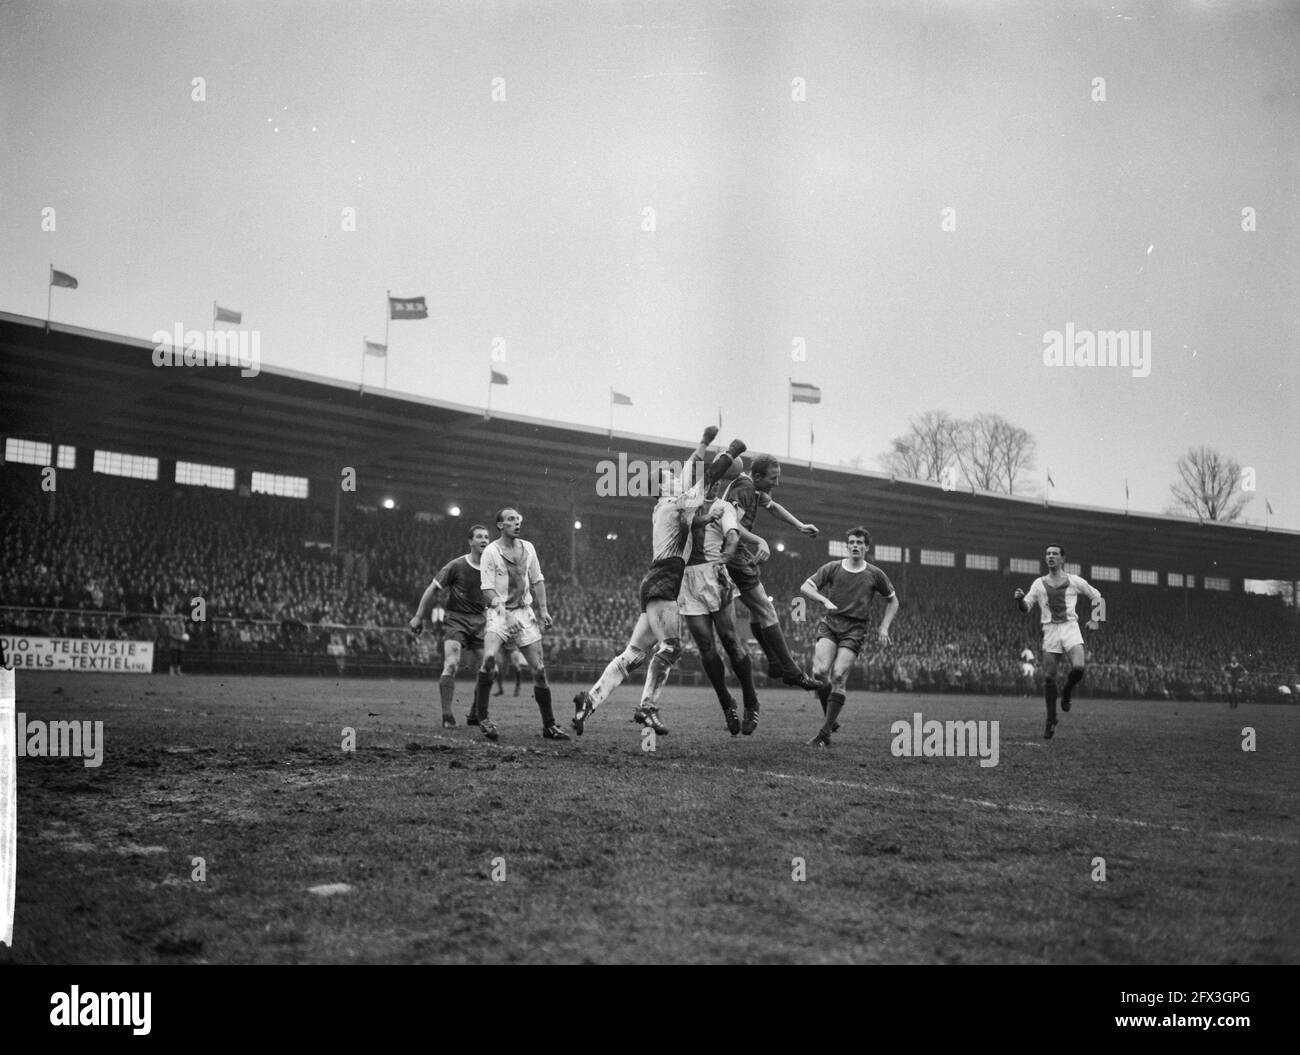 Game moment from a KNVB Cup match; Telstar against MVV: 1-0, 10 November  1973, cup matches, sports, soccer, The Netherlands, 20th century press  agency photo, news to remember, documentary, historic photography 1945-1990